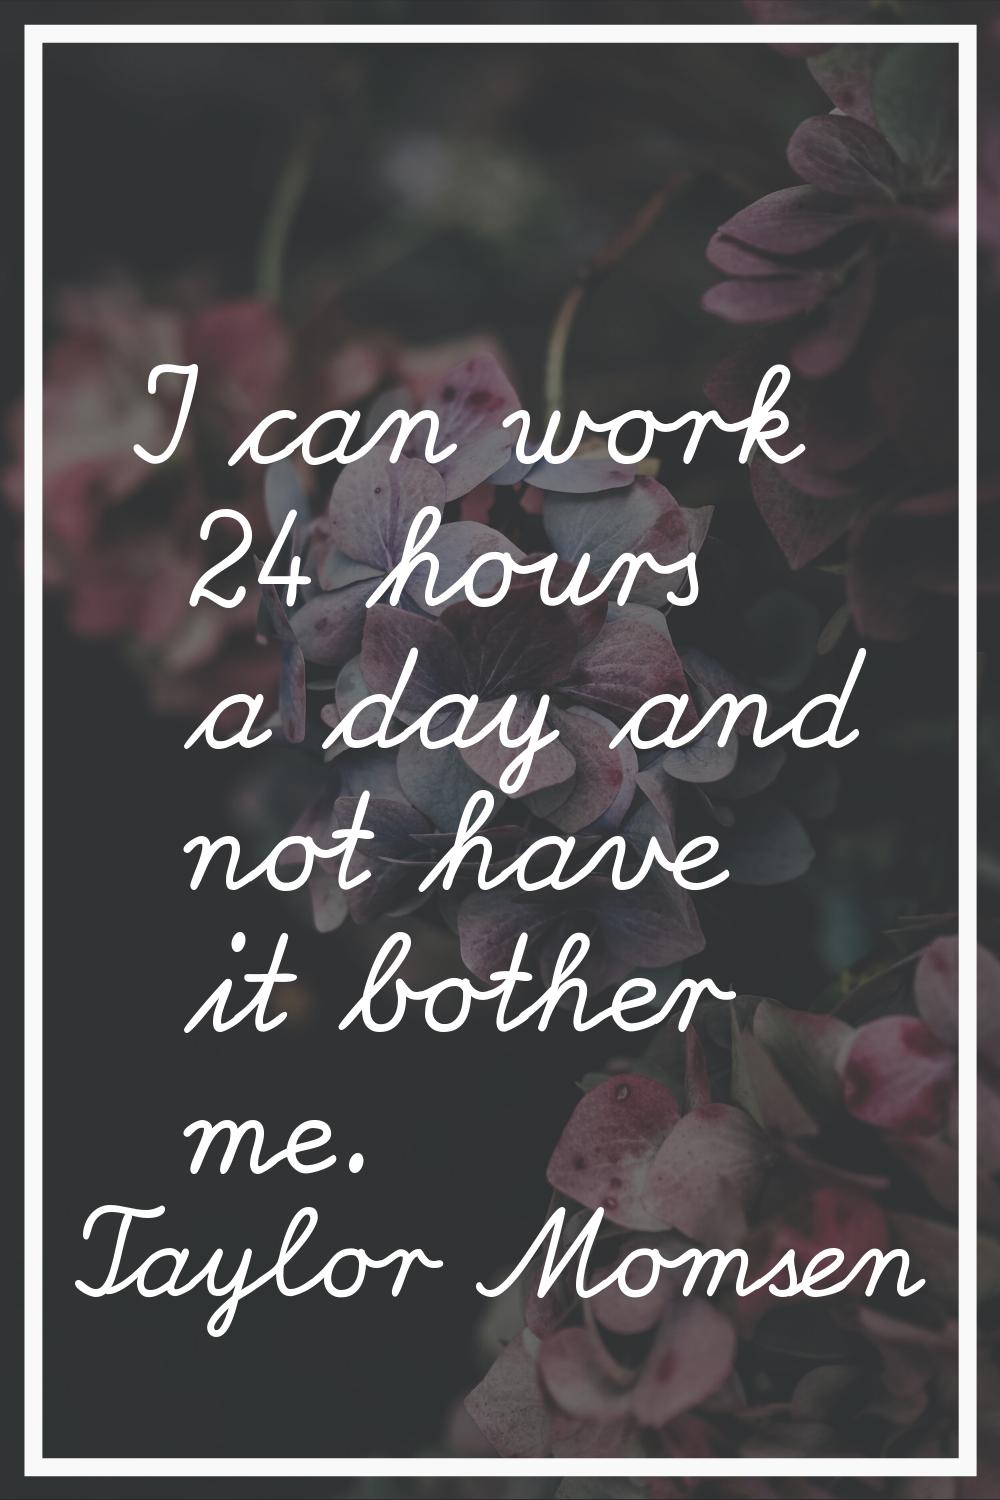 I can work 24 hours a day and not have it bother me.